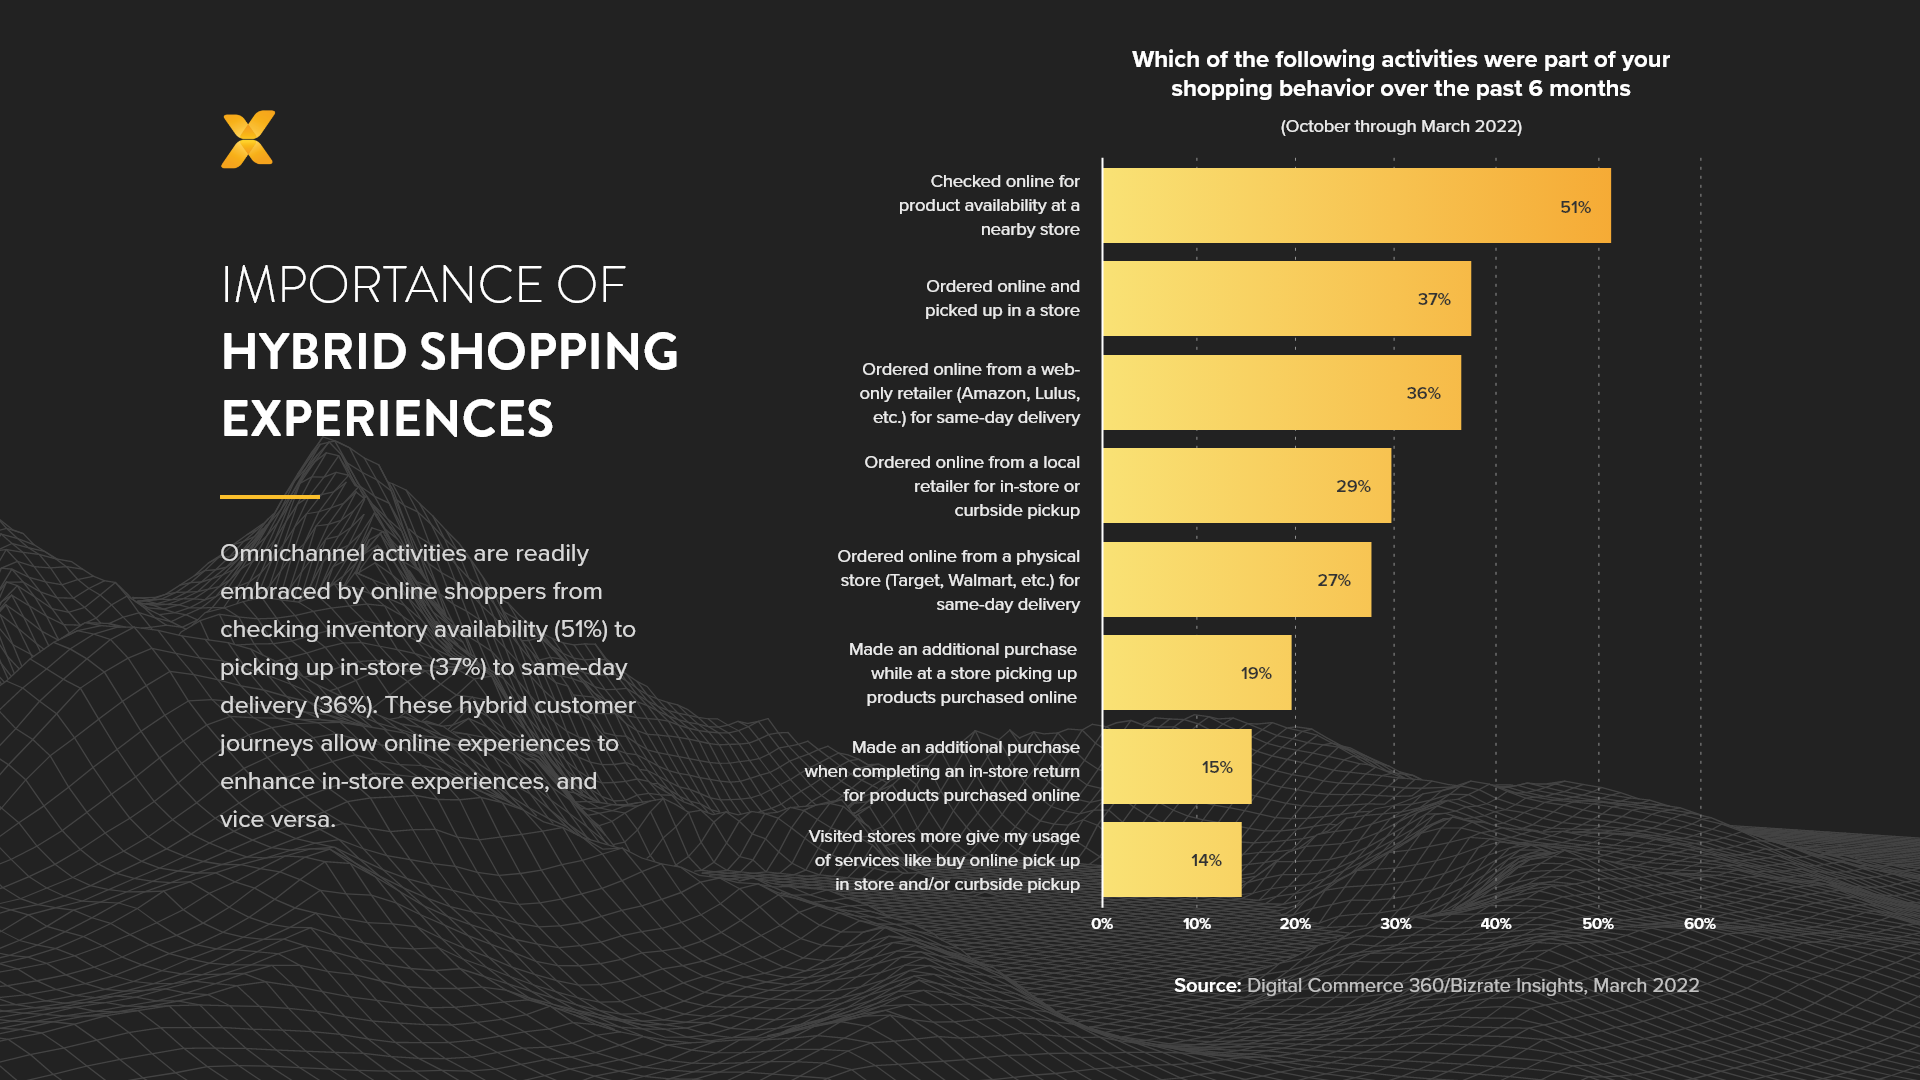 Prevalence of omnichannel shopping activities